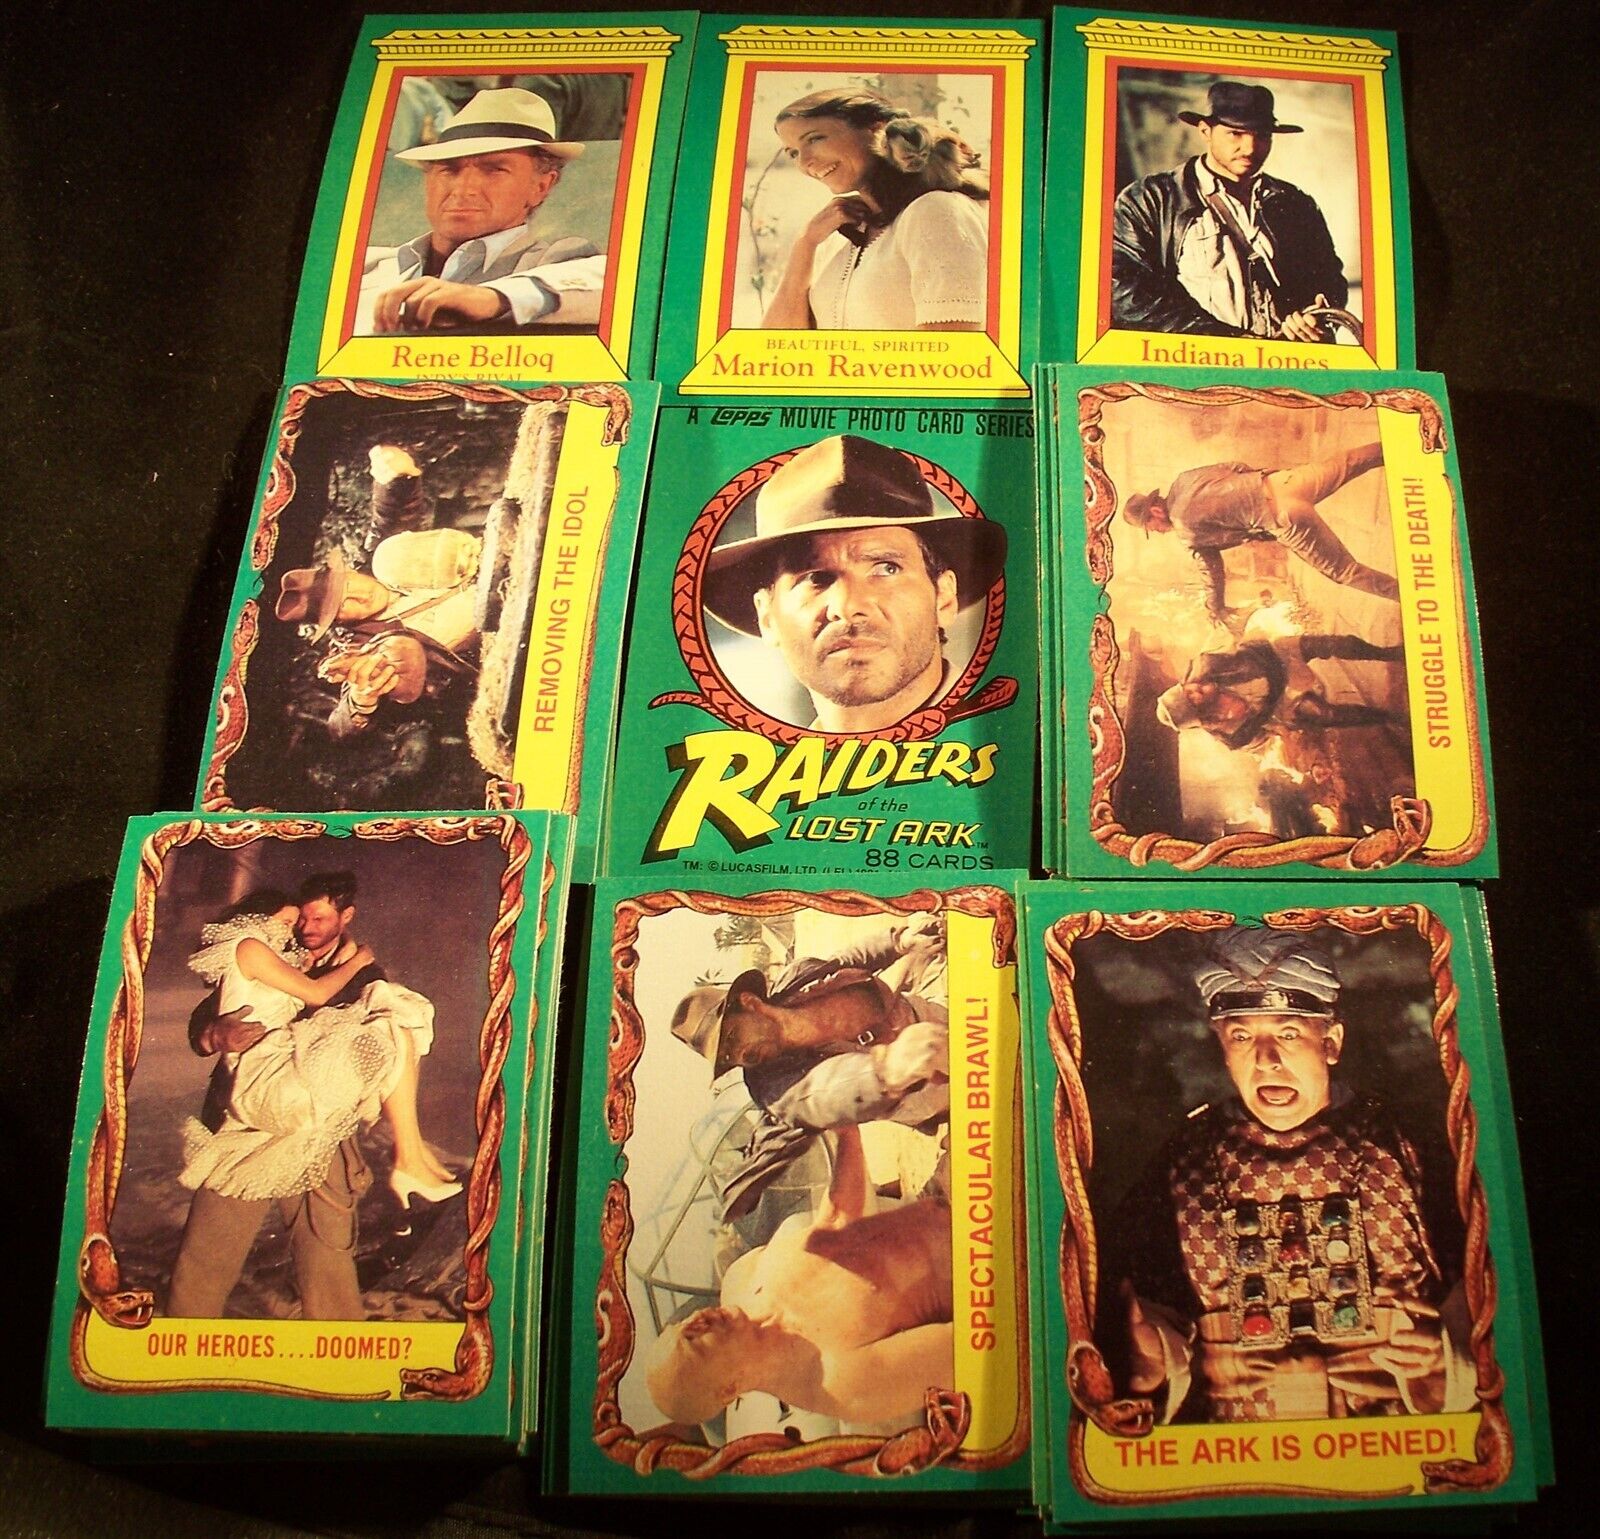 1981 Topps Indiana Jones RAIDERS OF THE LOST ARK Complete Card Set 1-88